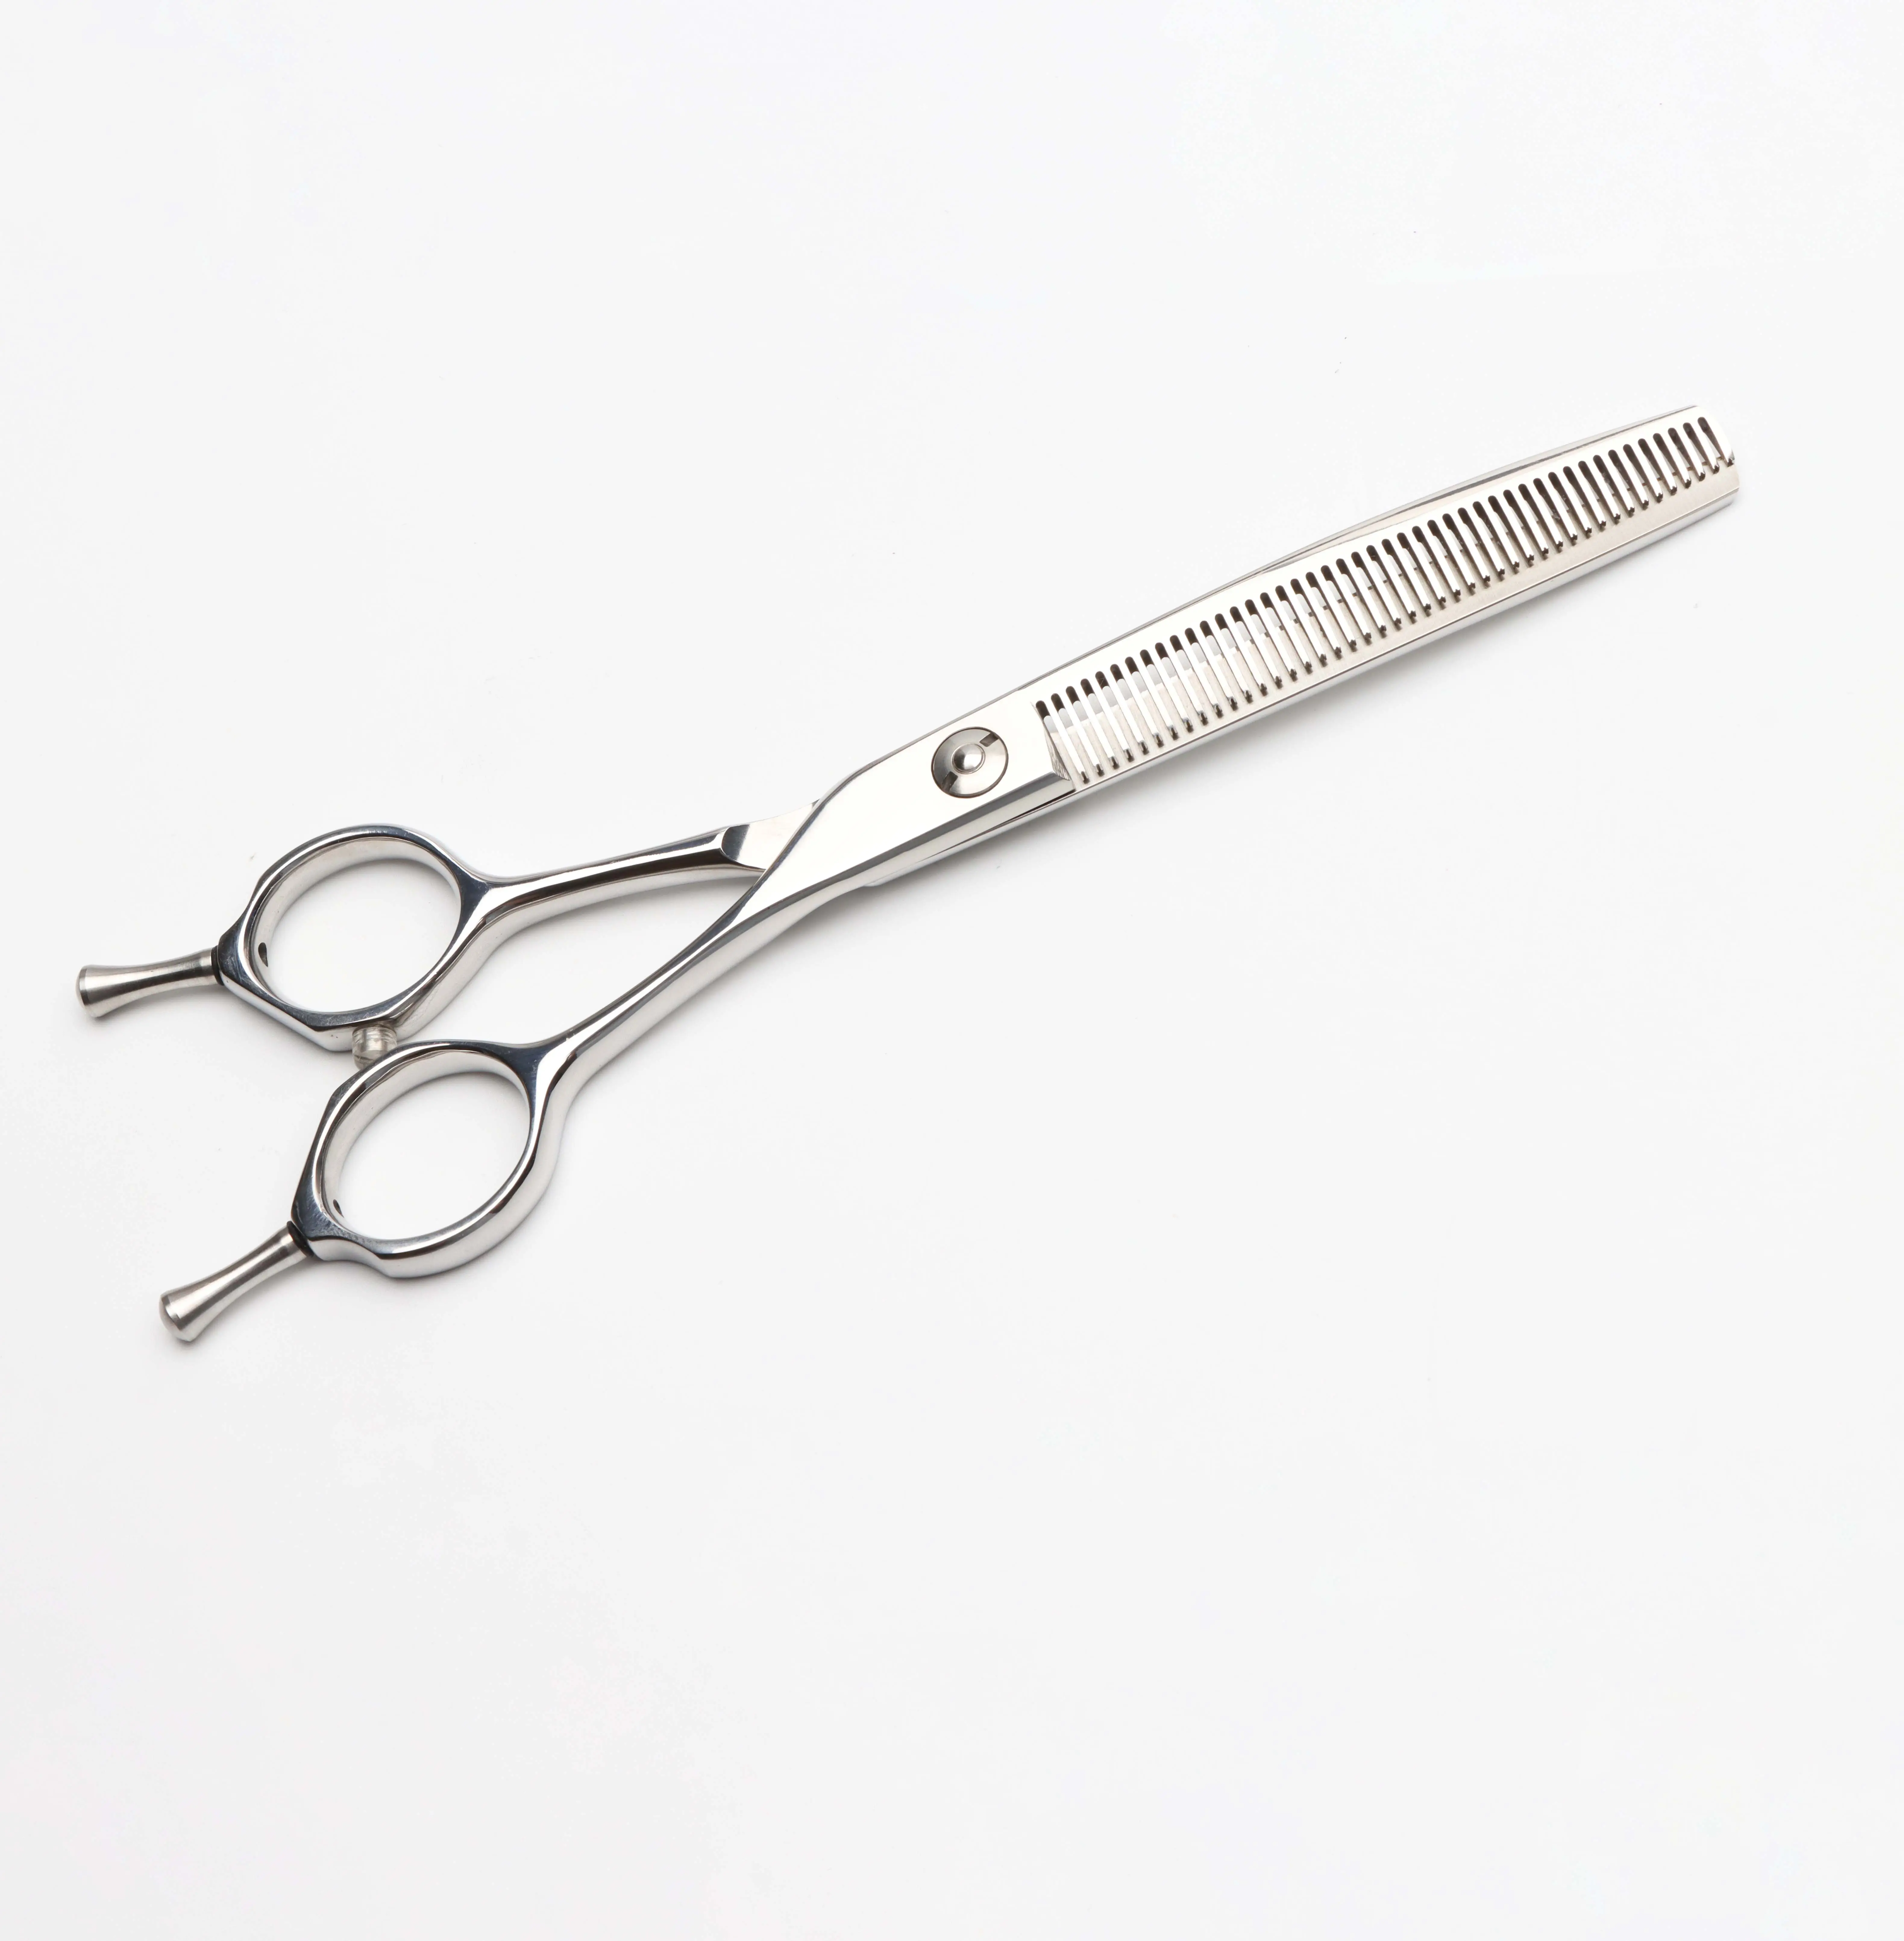 Pet products top sellers 6.5 inches 45 tooth curved dog thinning scissors hair scissors titan thinning